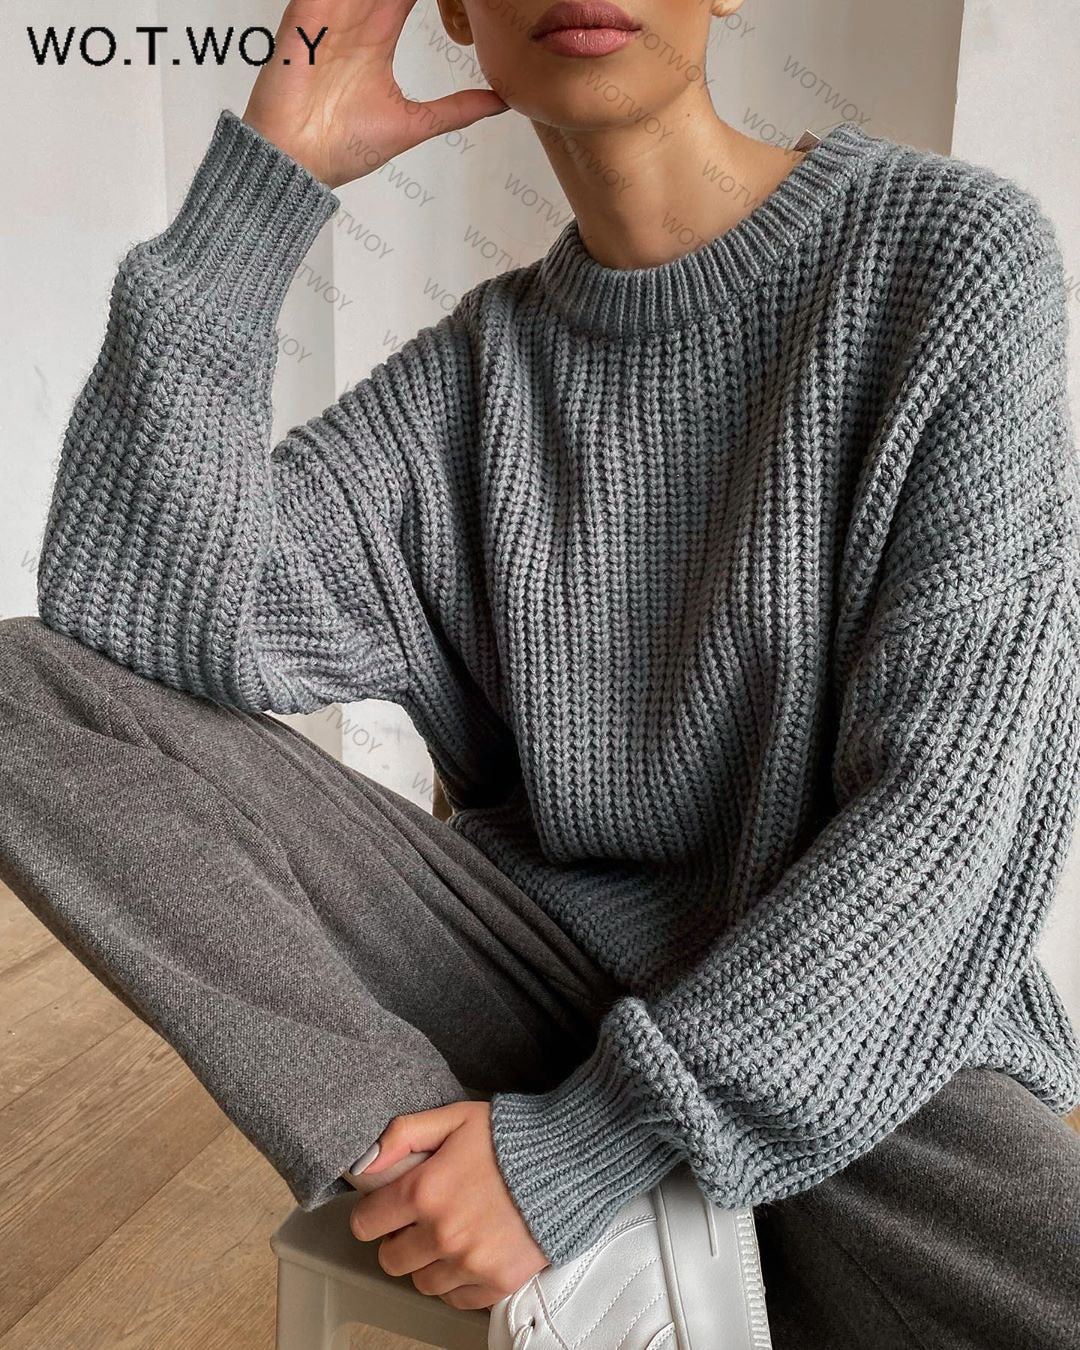 PENERAN Autumn Winter Thickening Oversized Sweater Women Long Sleeve Casual Loose Pullovers Female Cashmere Solid Knitted Tops